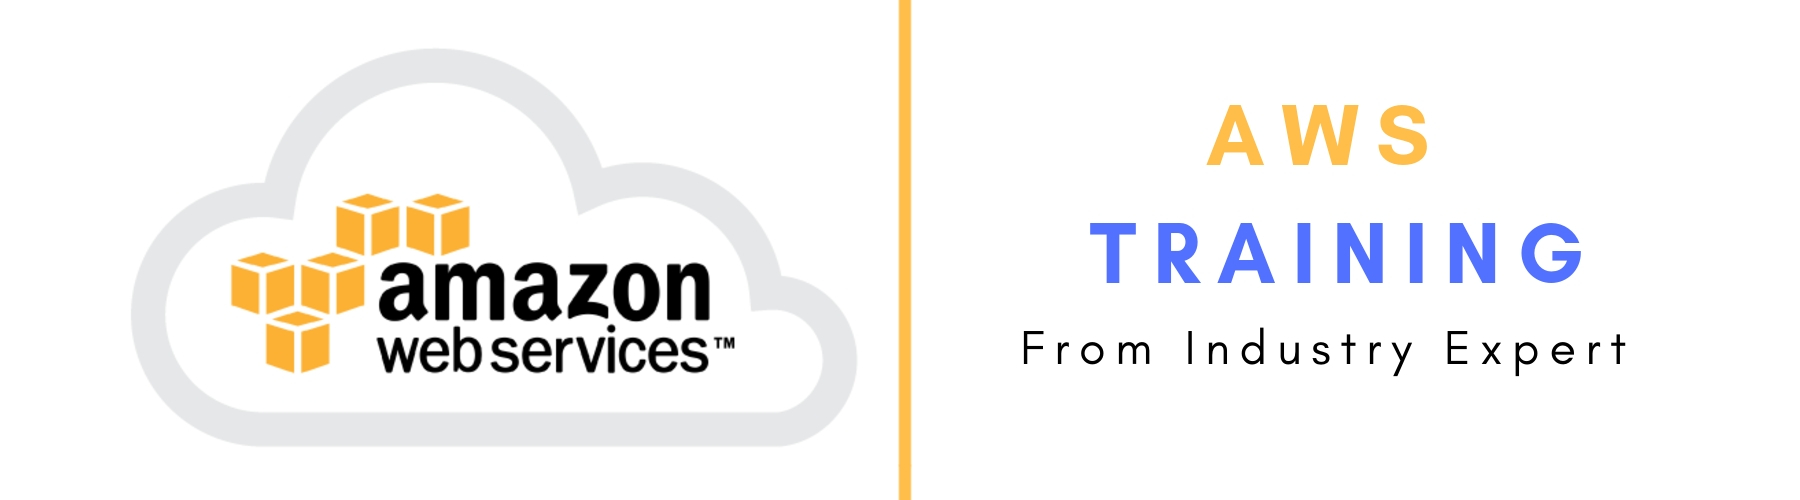 AWS Training from Industry Experts